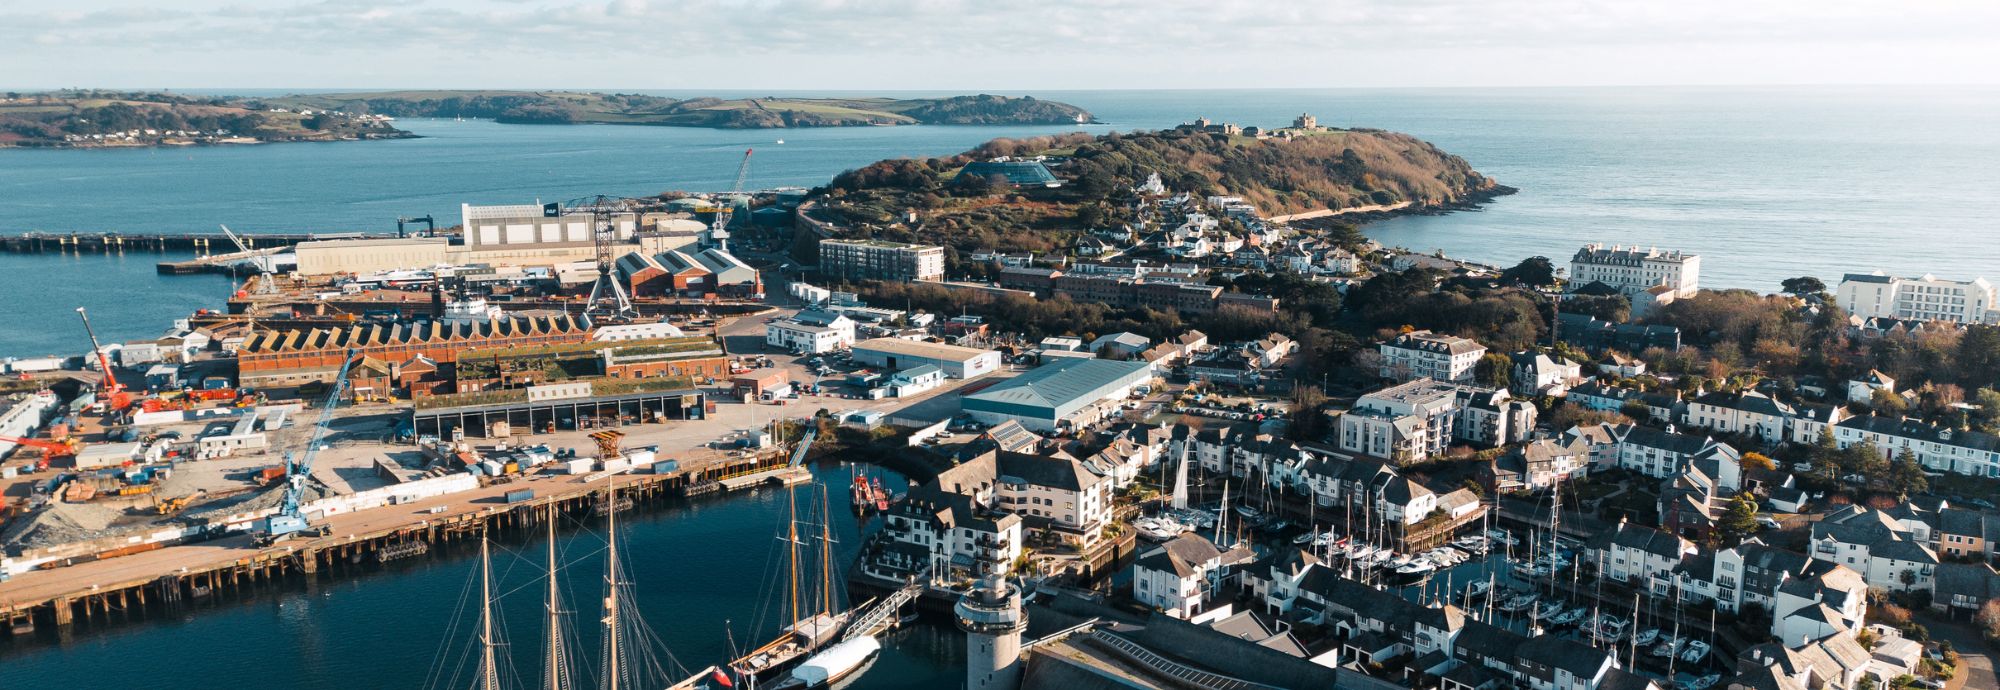 A photo taken from a drone overlooking National Maritime Museum Cornwall, Falmouth Docks, Pendennis Castle, and out to sea on a clear day.